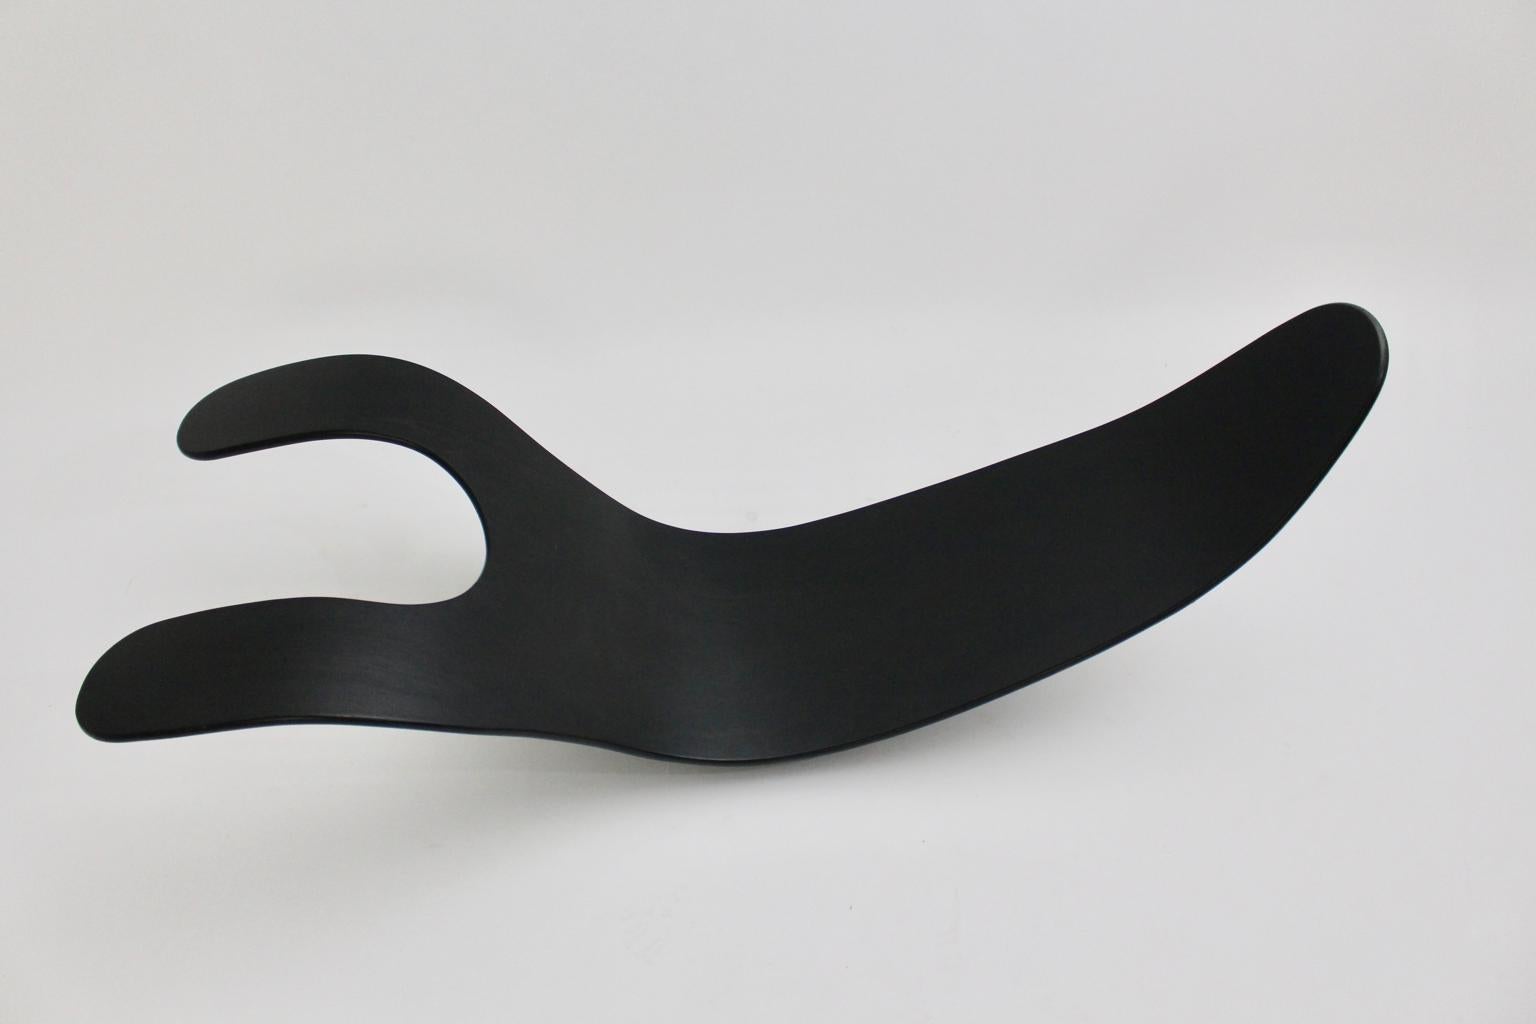 Black Scandinavian Modern Rocking Chair Chip by Teppo Asikainen Ikka Terho, 1995 In Good Condition For Sale In Vienna, AT